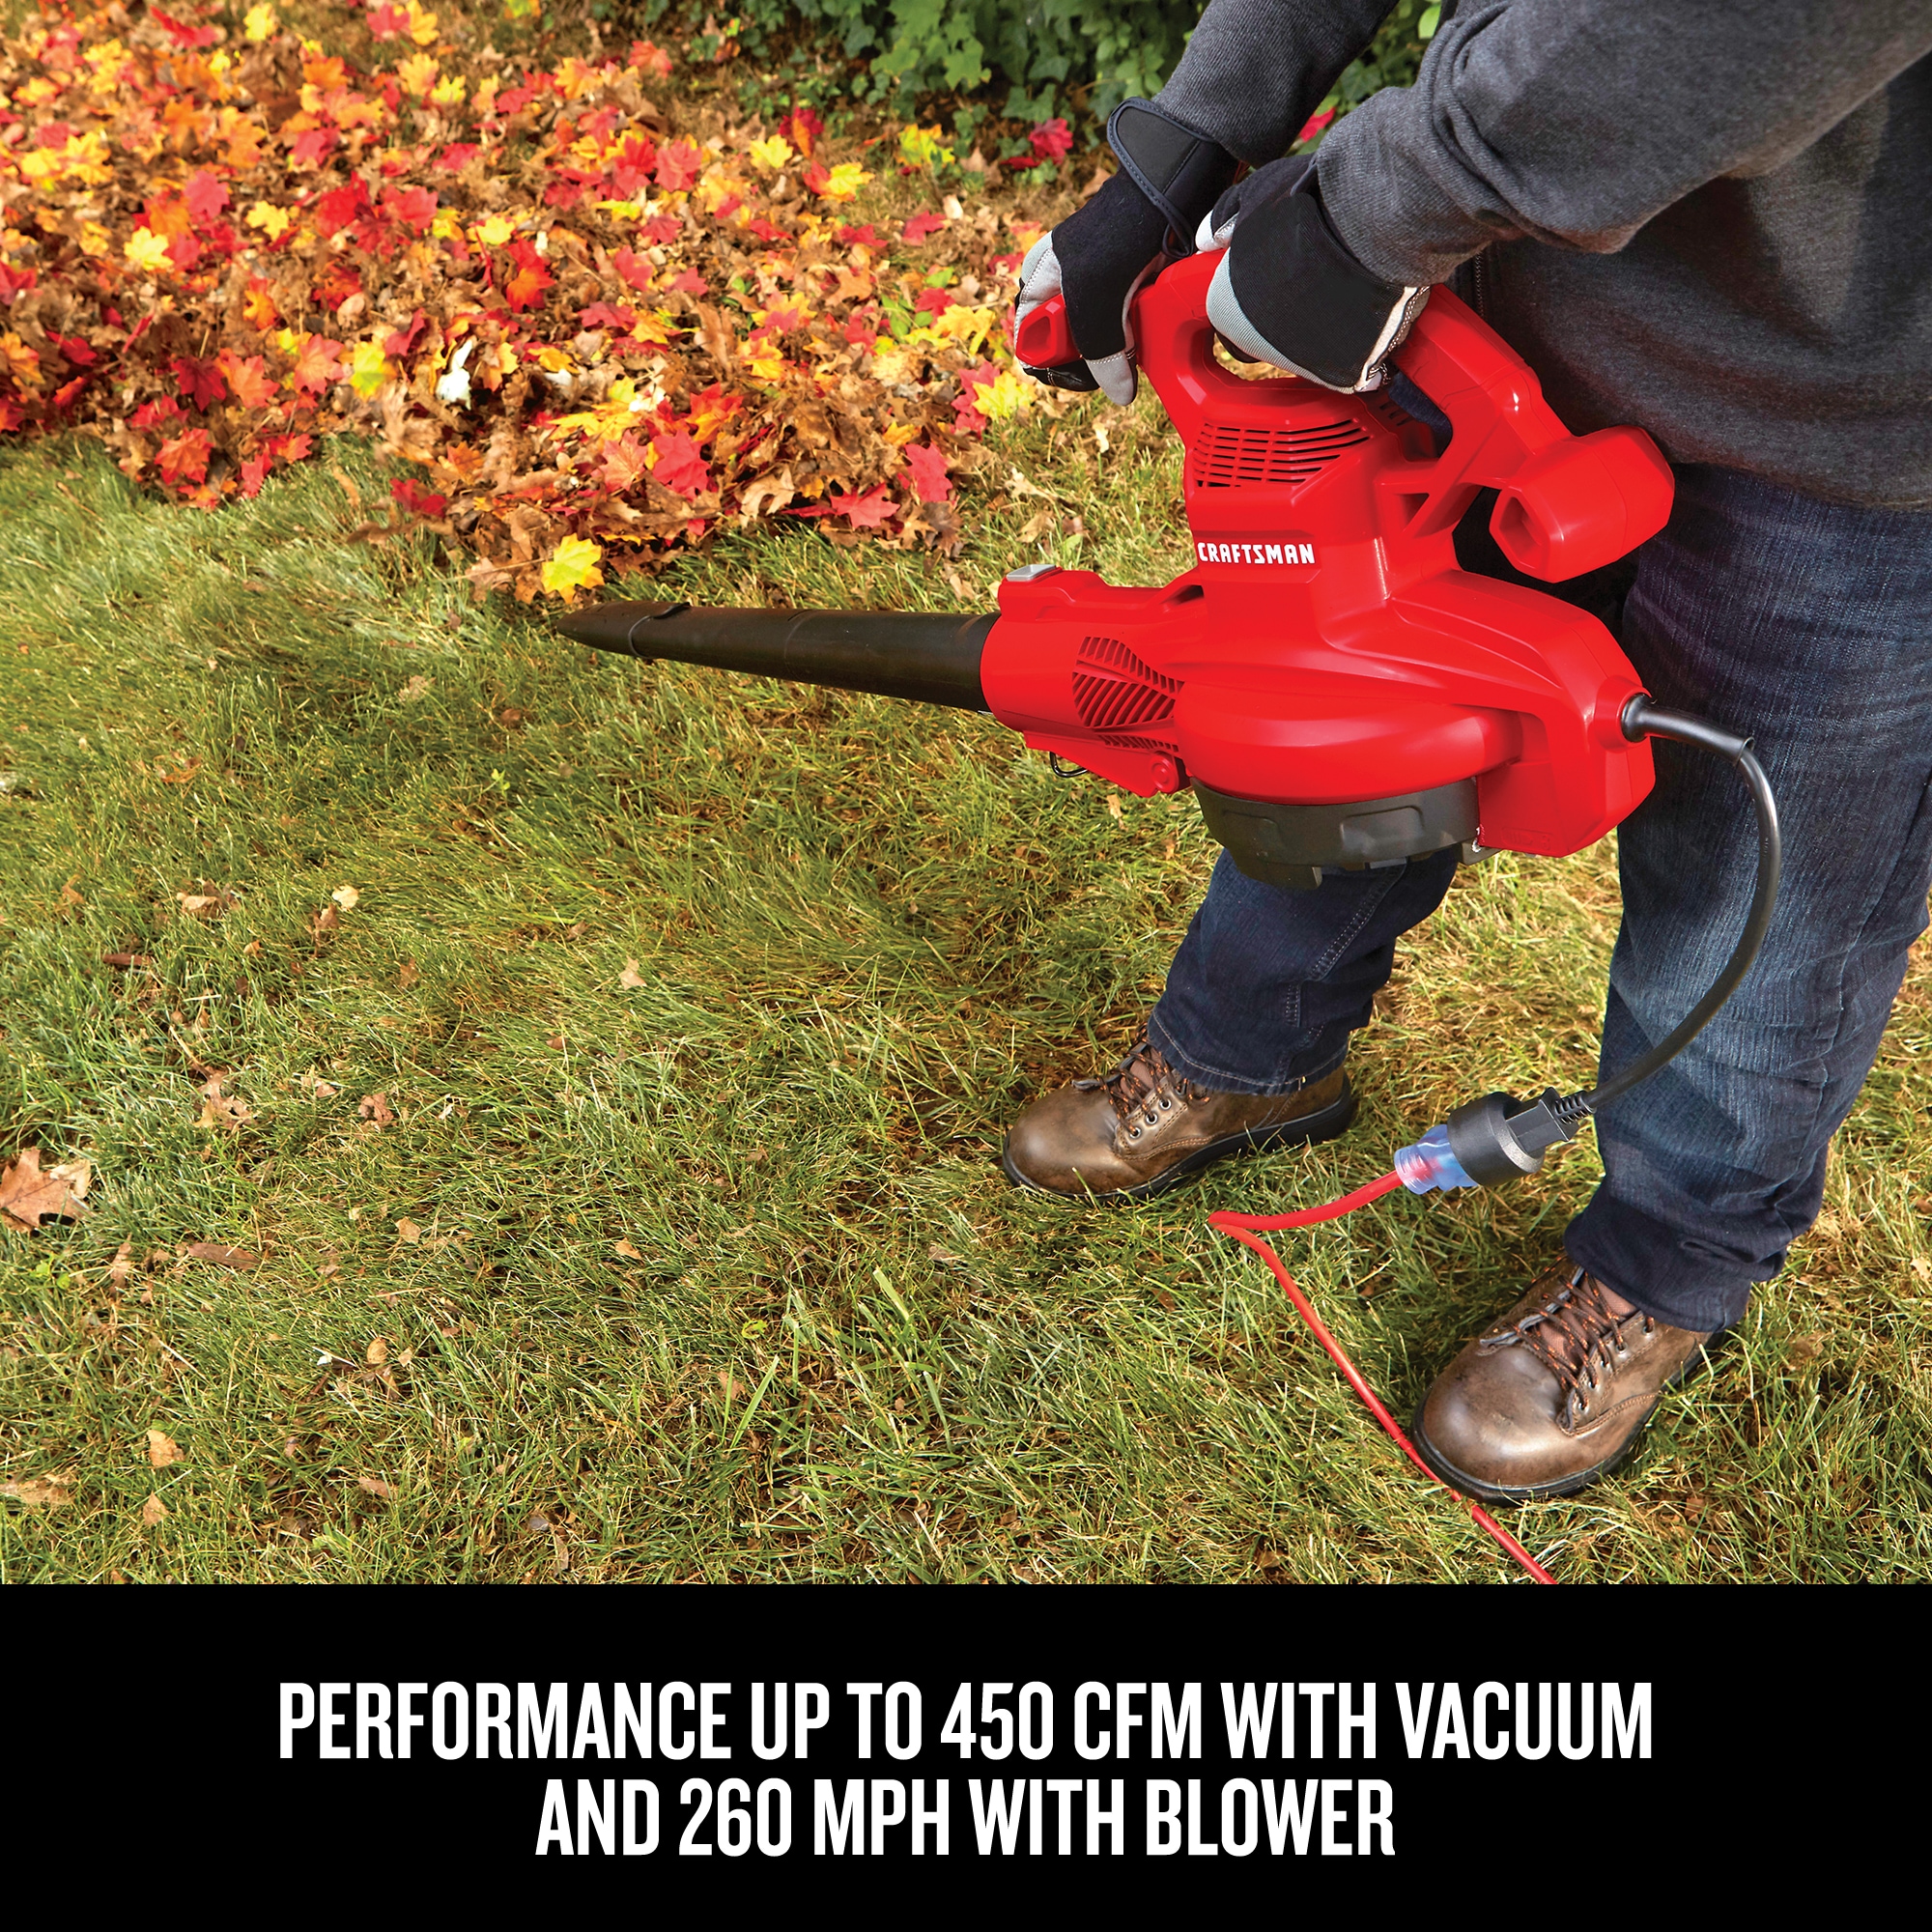 This 3-in-1 lawn tool for mulching and blowing leaves 'can't be beat